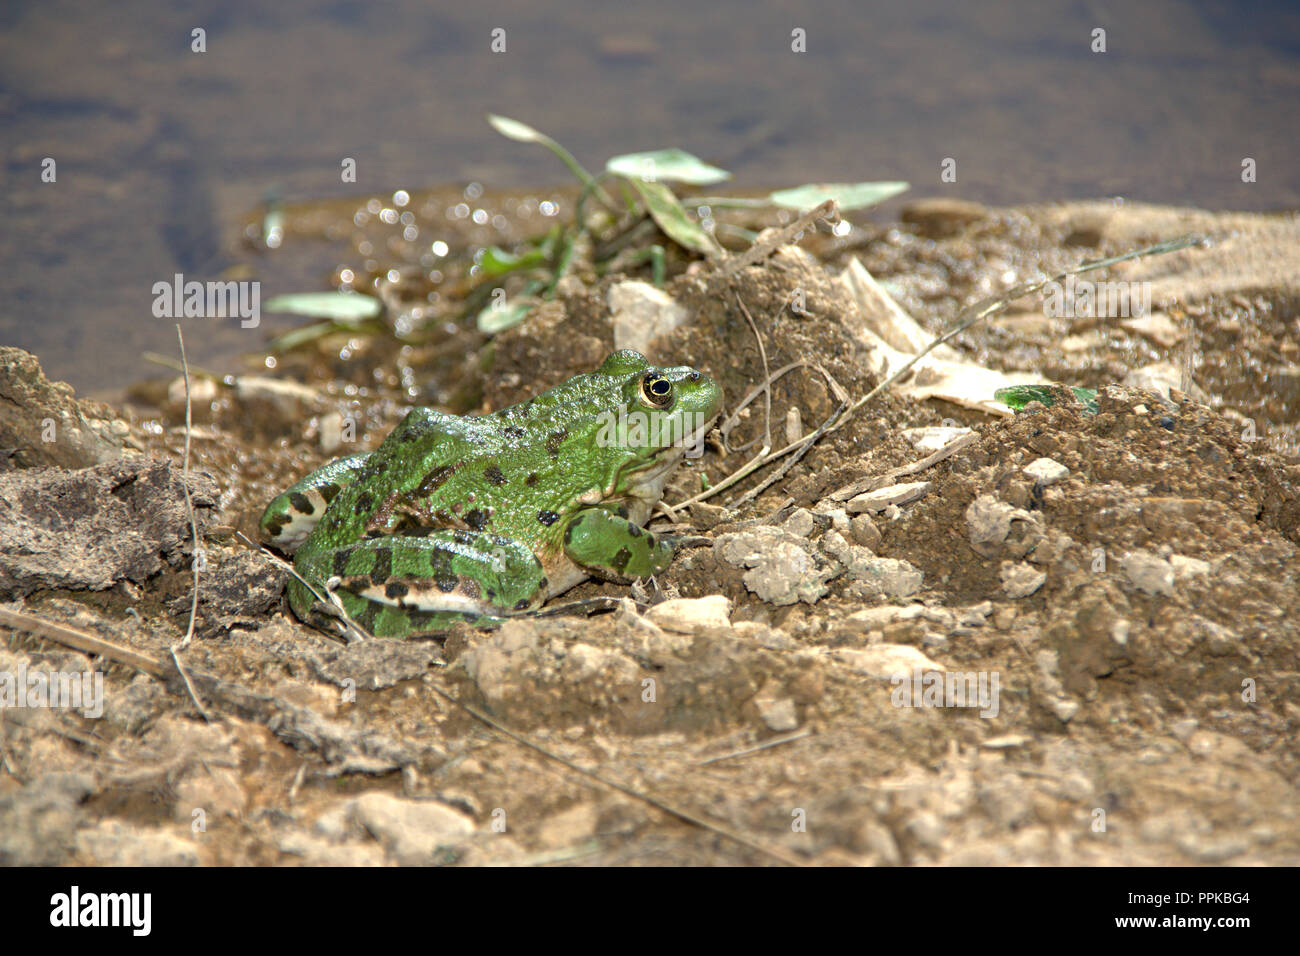 Frog with green colour skin with black dots, on sun lights lying the ground, he looks on the cold water, see prepare for jump Stock Photo